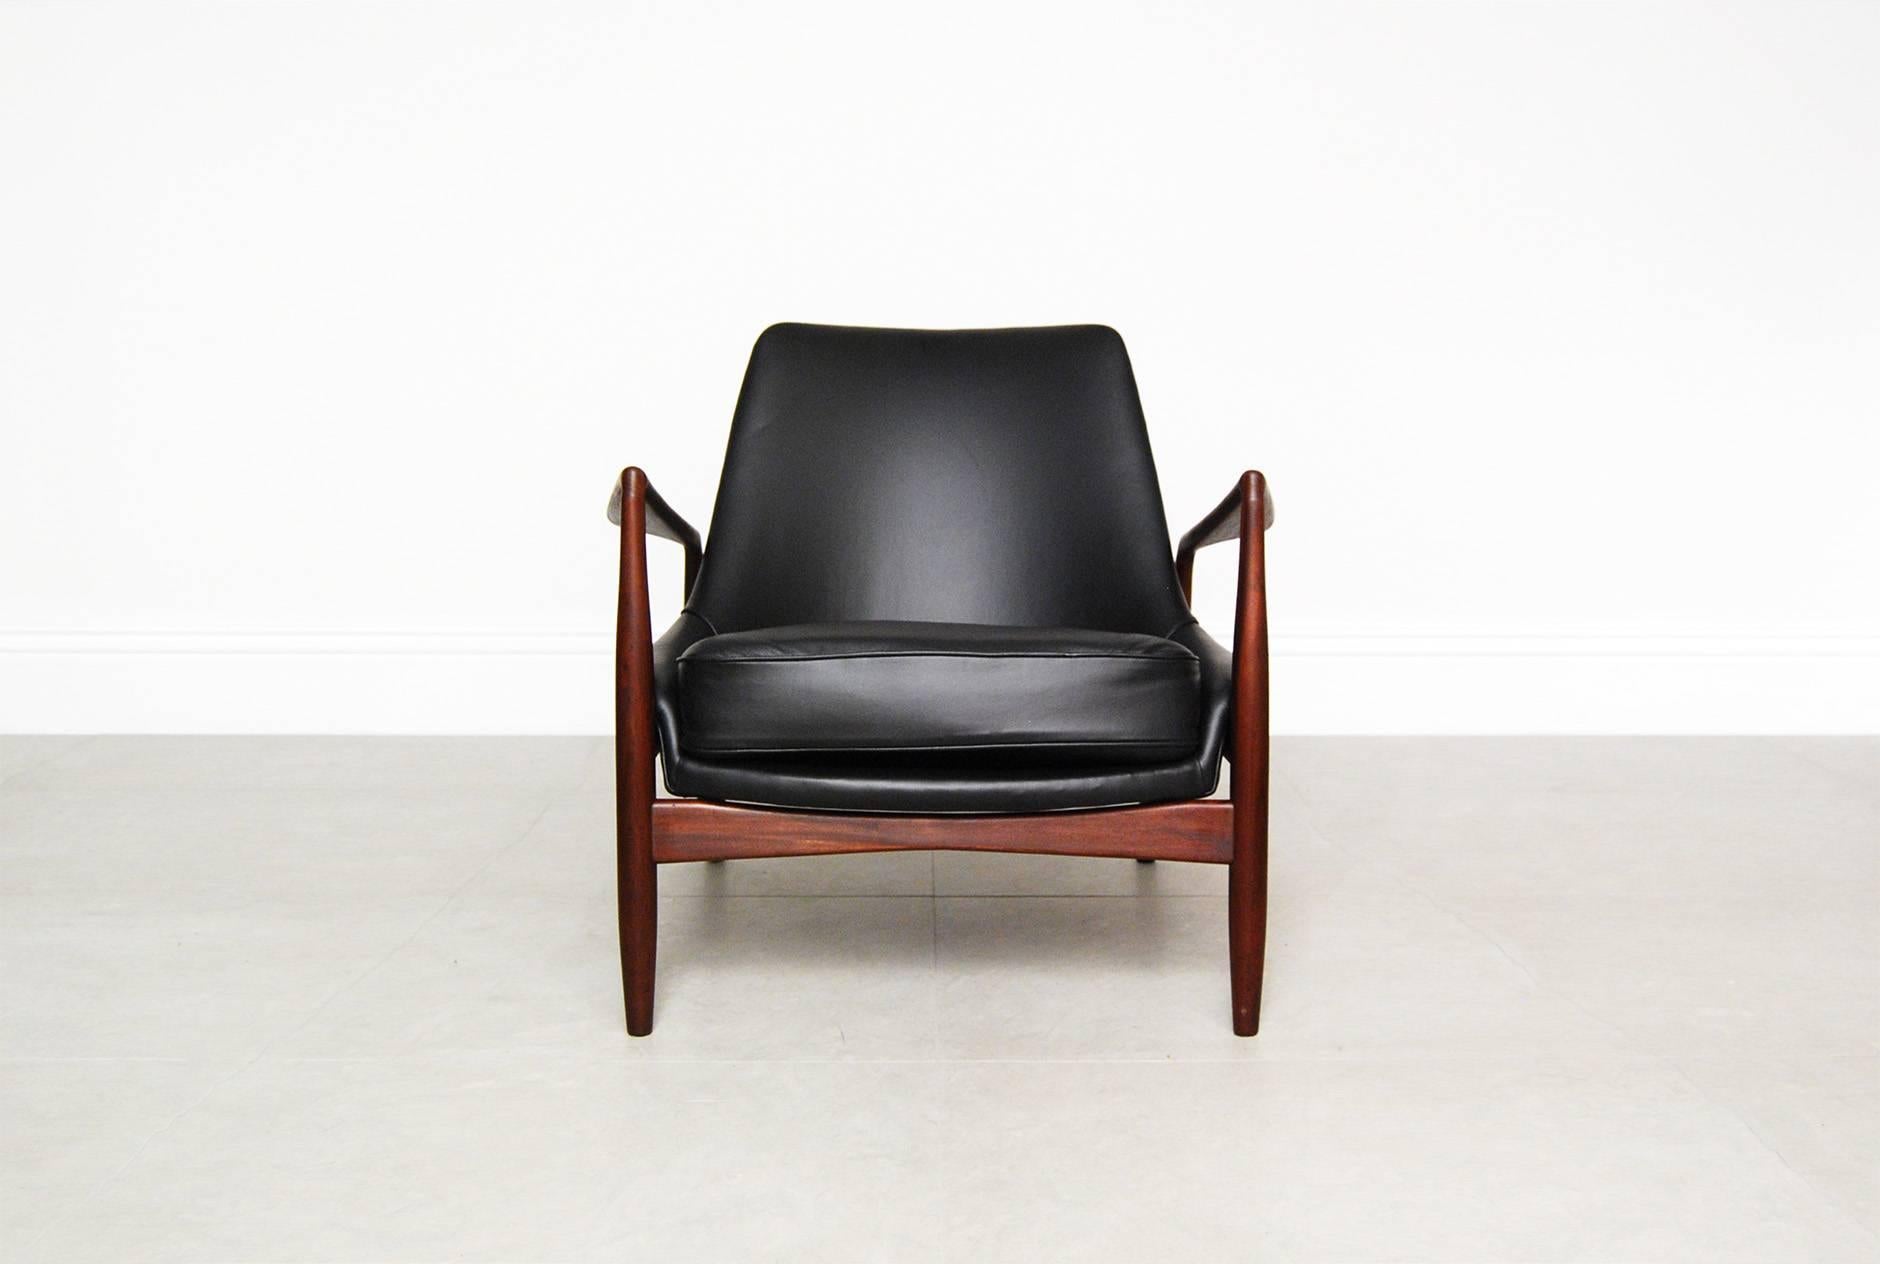 Rare and highly collectable piece from Danish master Ib Kofod-Larsen for Swedish manufacturer OPE. The 'Salen' or 'Seal' chair was designed and made in the late 1950s. This example comes in rich, oiled Afromosia teak. The seat and loose cushion have